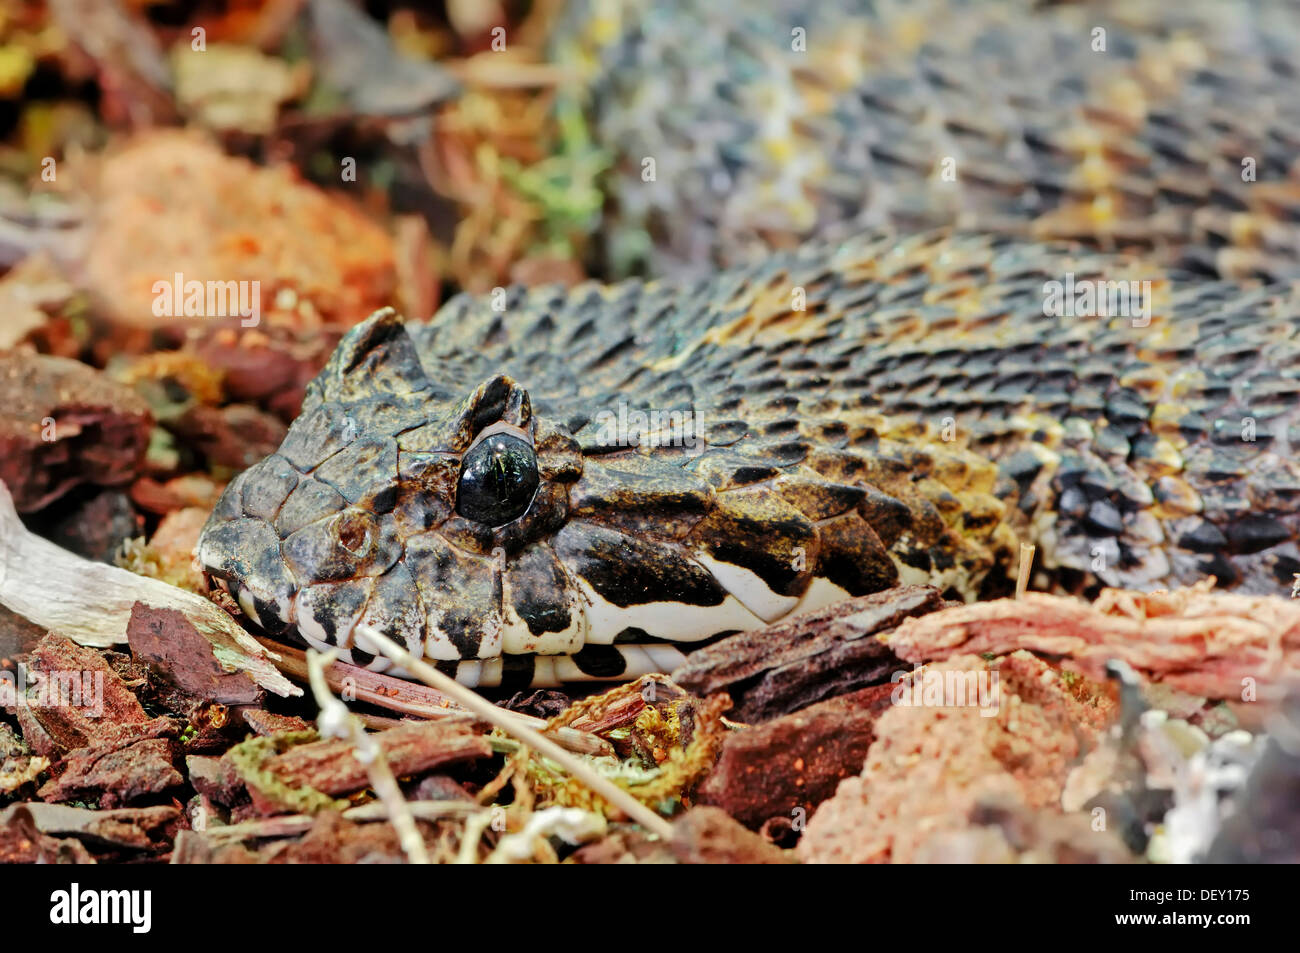 Irian Jayan Death Adder or Rough-scaled Death Adder (Acanthophis rugosus), venomous snake, portrait, native to Indonesia Stock Photo